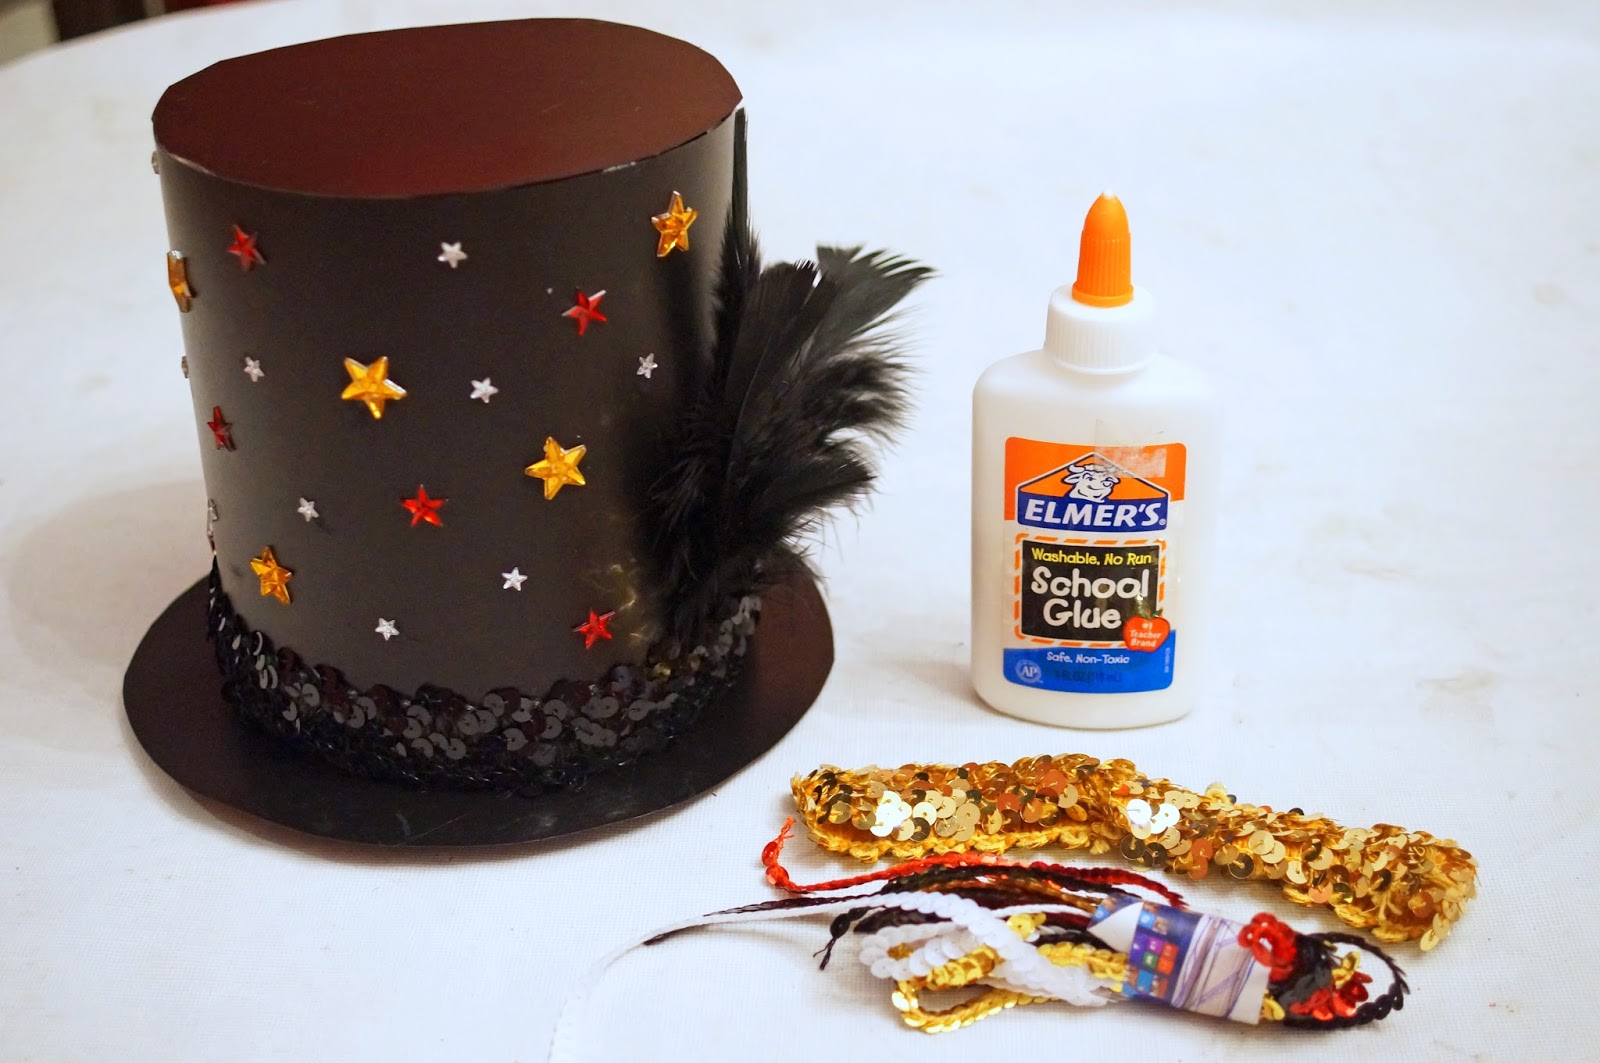 Click through to learn how to make this cute top hat at home!